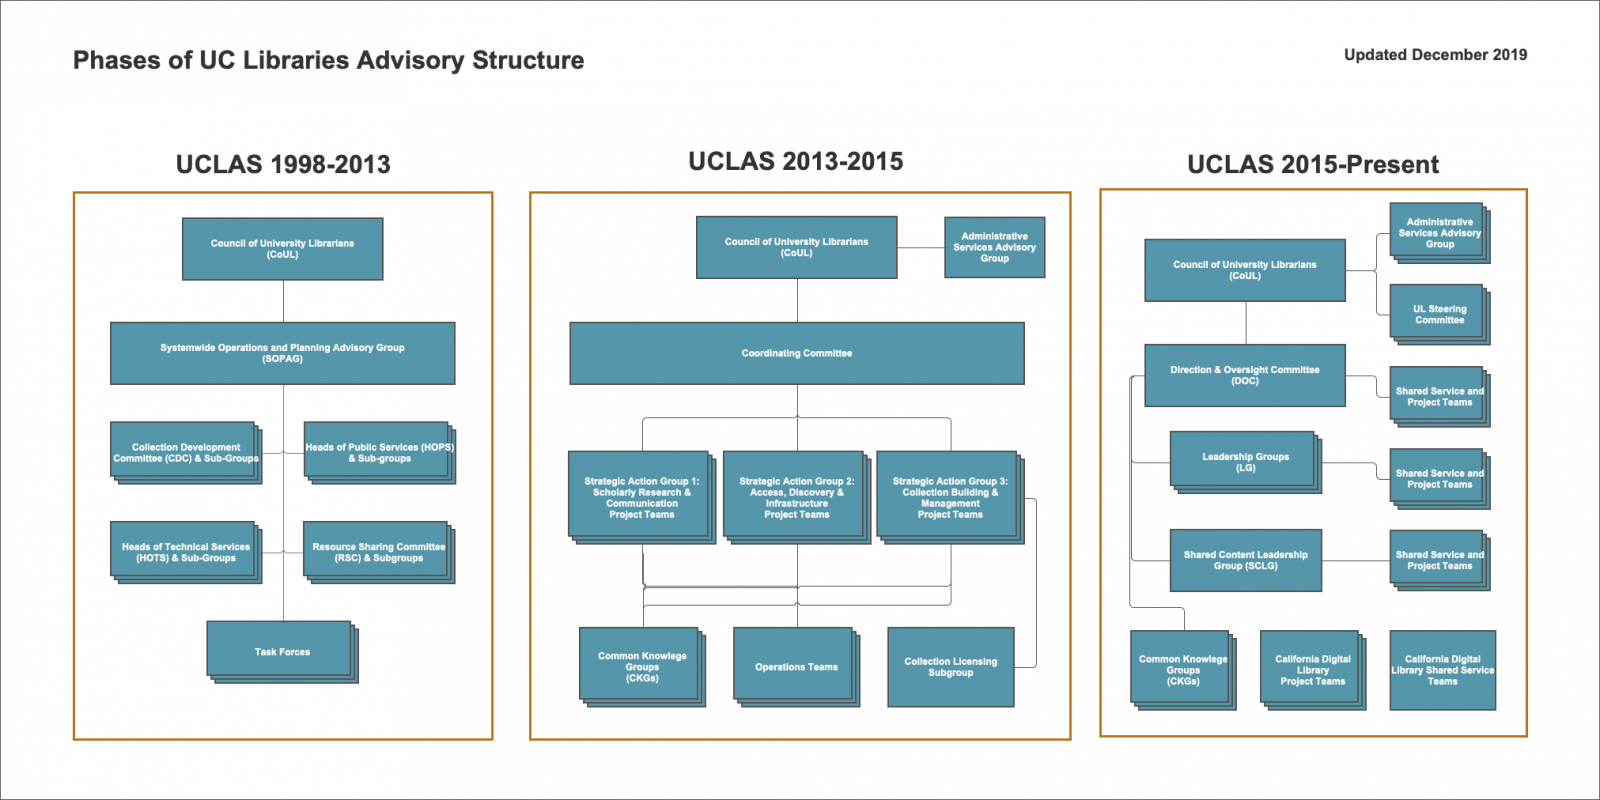 High-level view of changes to UC Libraries Advisory Structure, 1998 to present day.